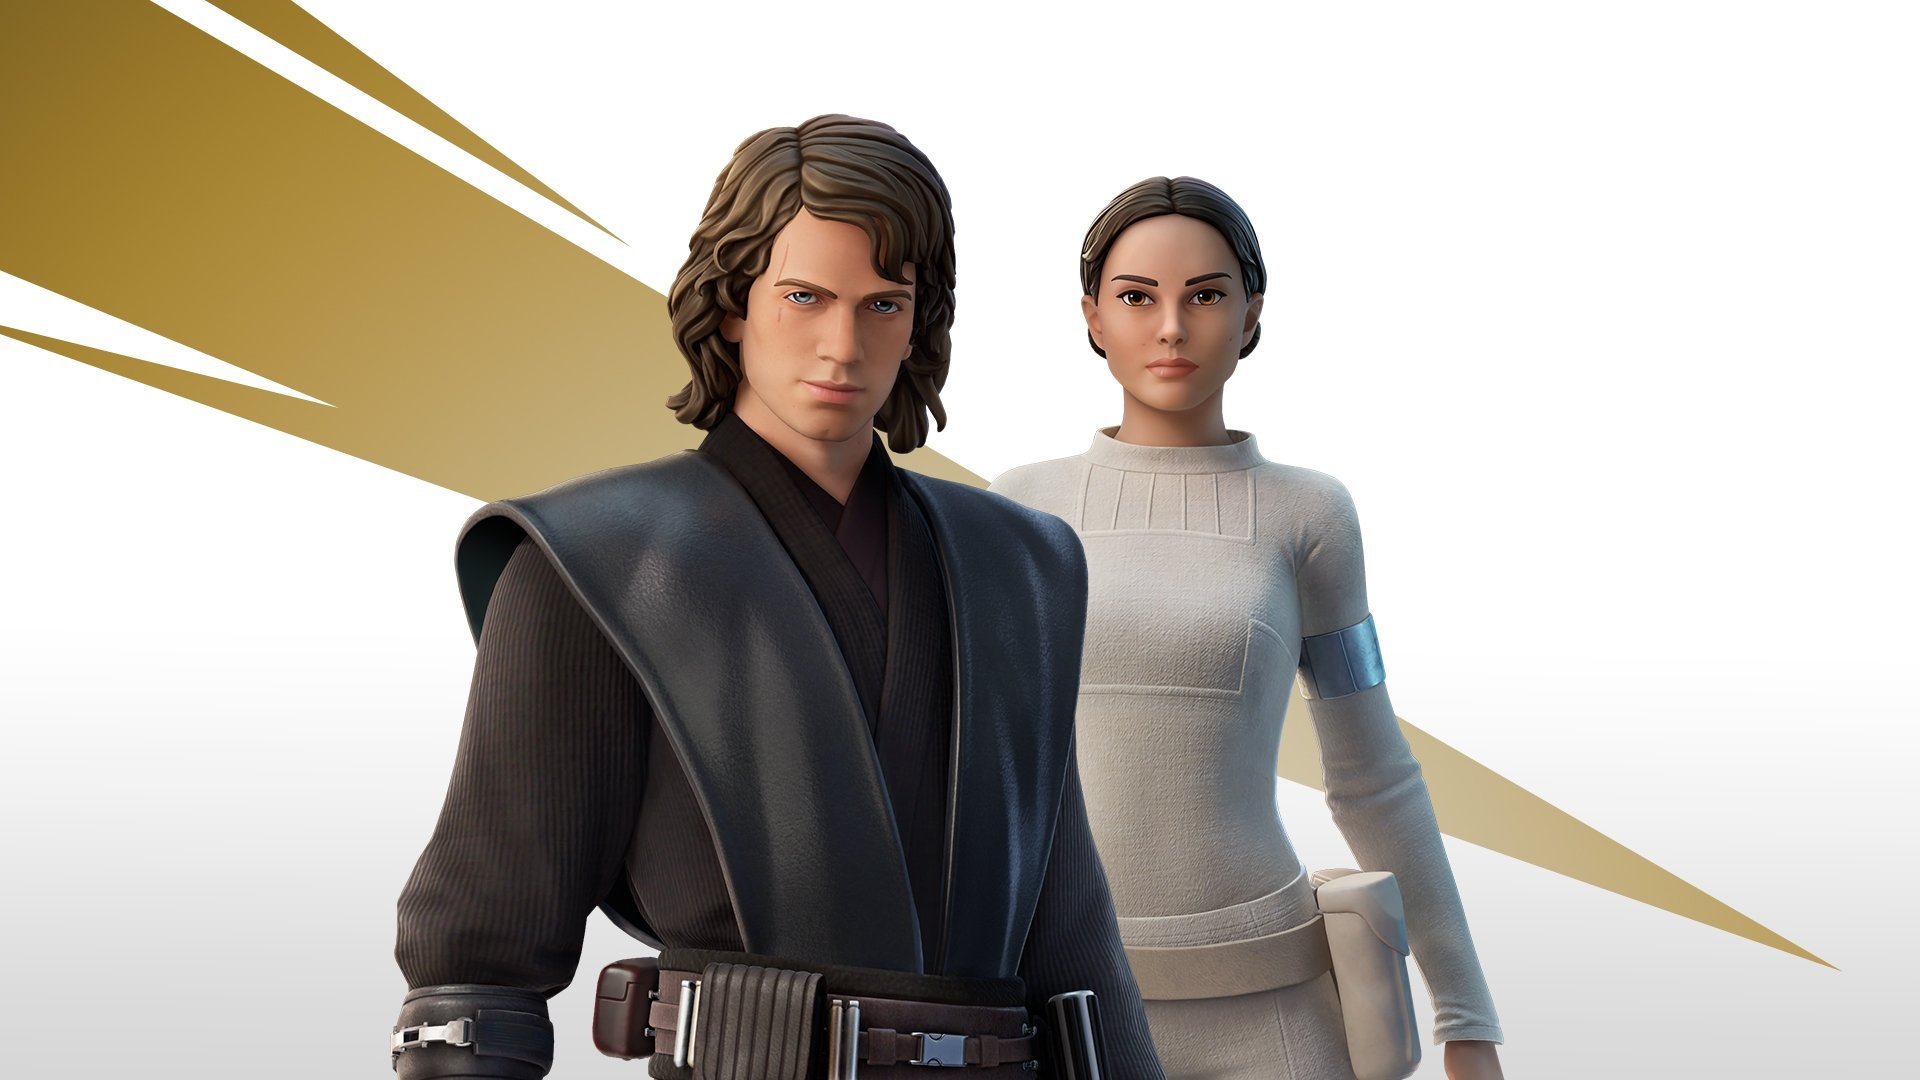 Fortnite News on X: "Anakin and Padme outfits! https://t.co/dzTBdVzp2y" / X